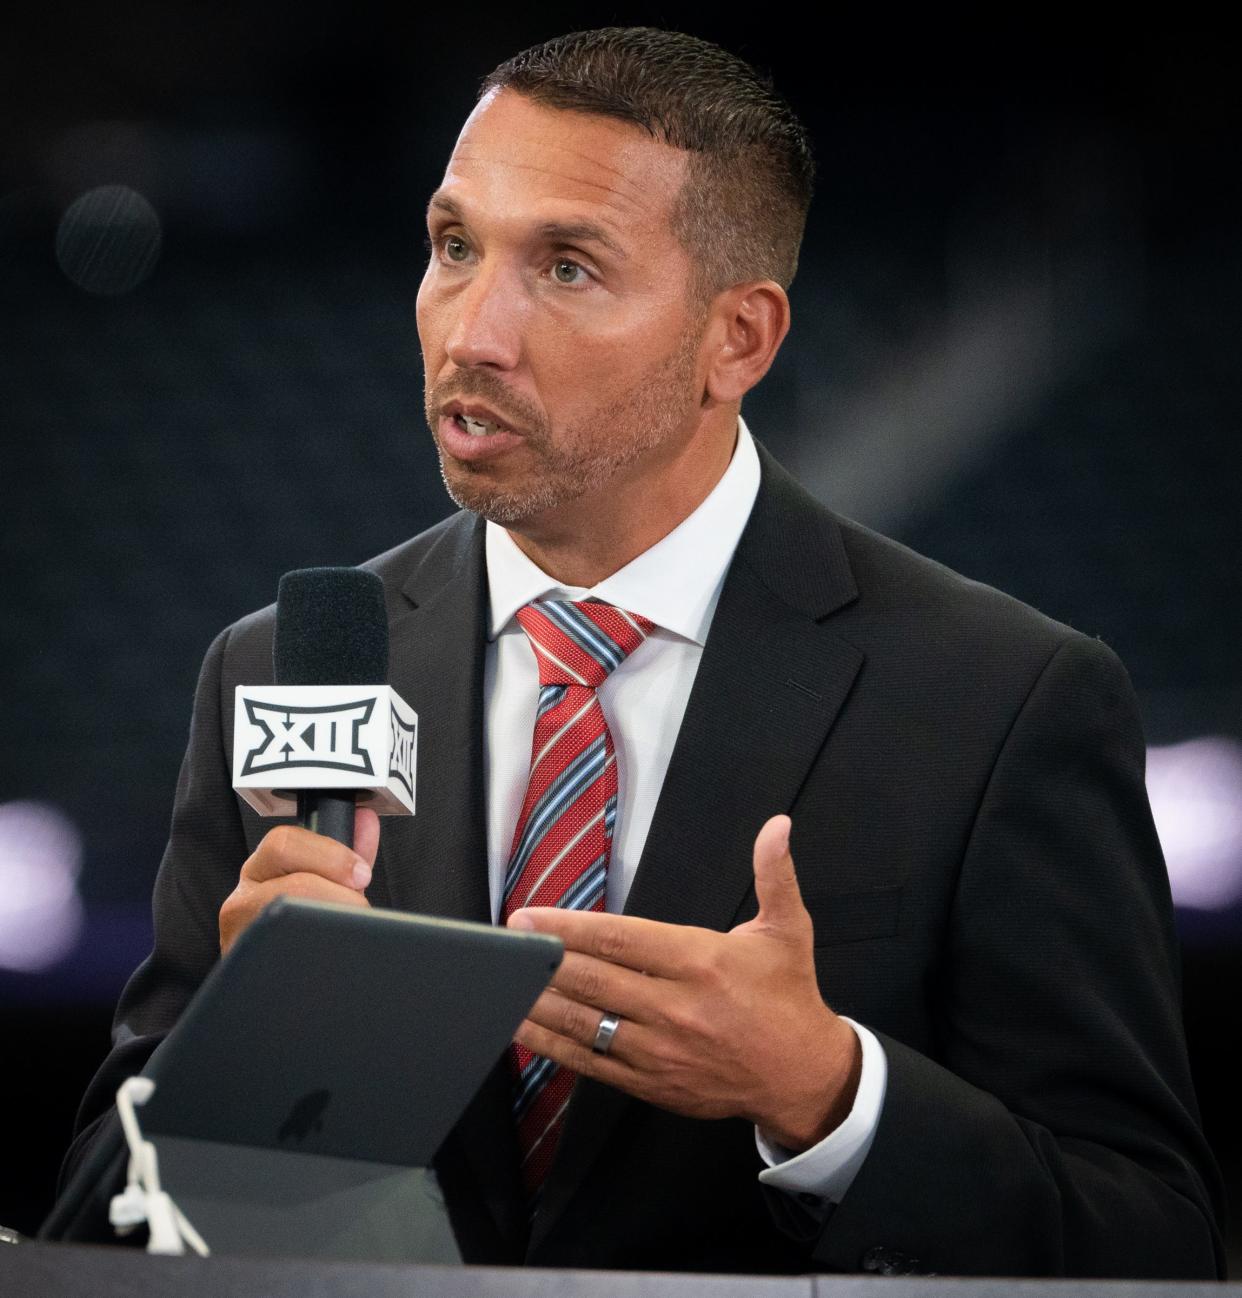 Iowa State coach Matt Campbell, shown in July at Big 12 media days in Texas, addressed the ongoing gambling investigation and more at Friday's ISU media day in Ames.